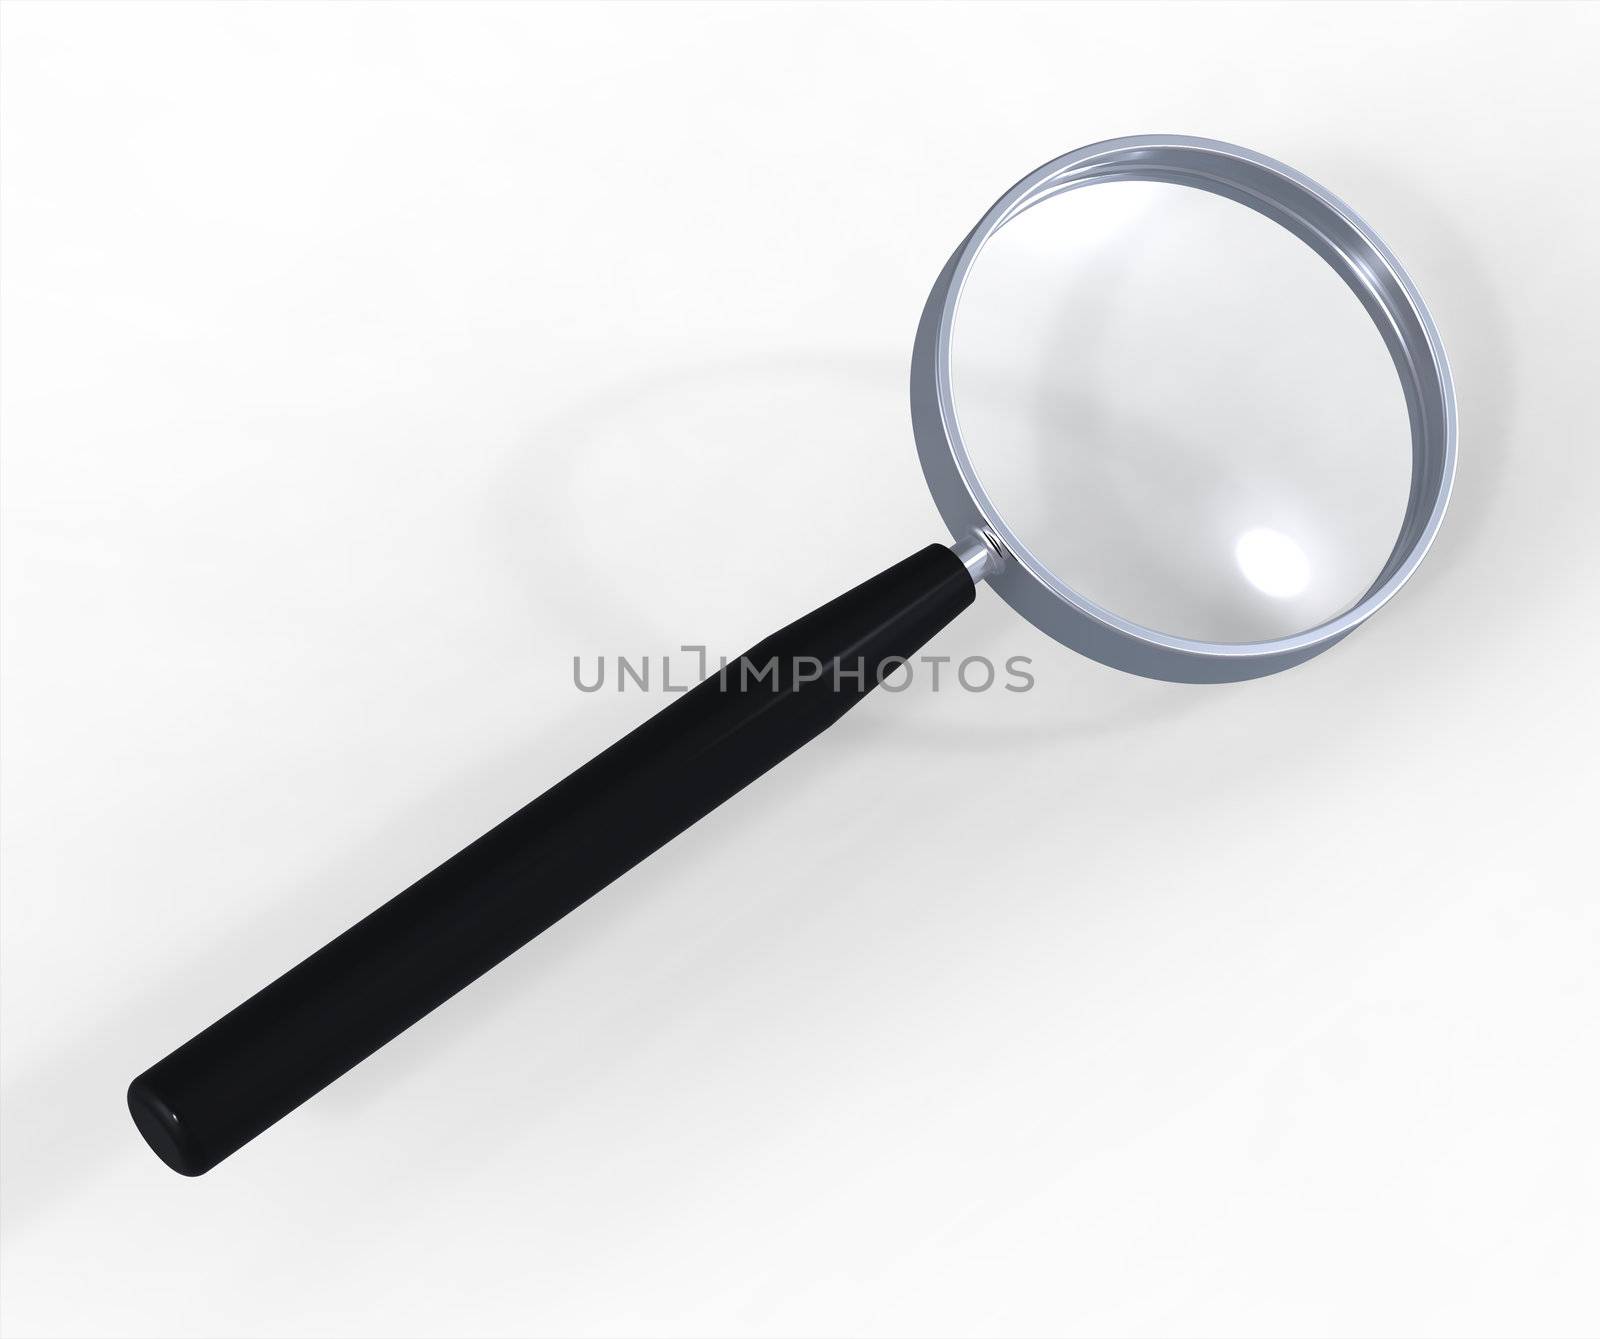 Magnifying glass by Boris15